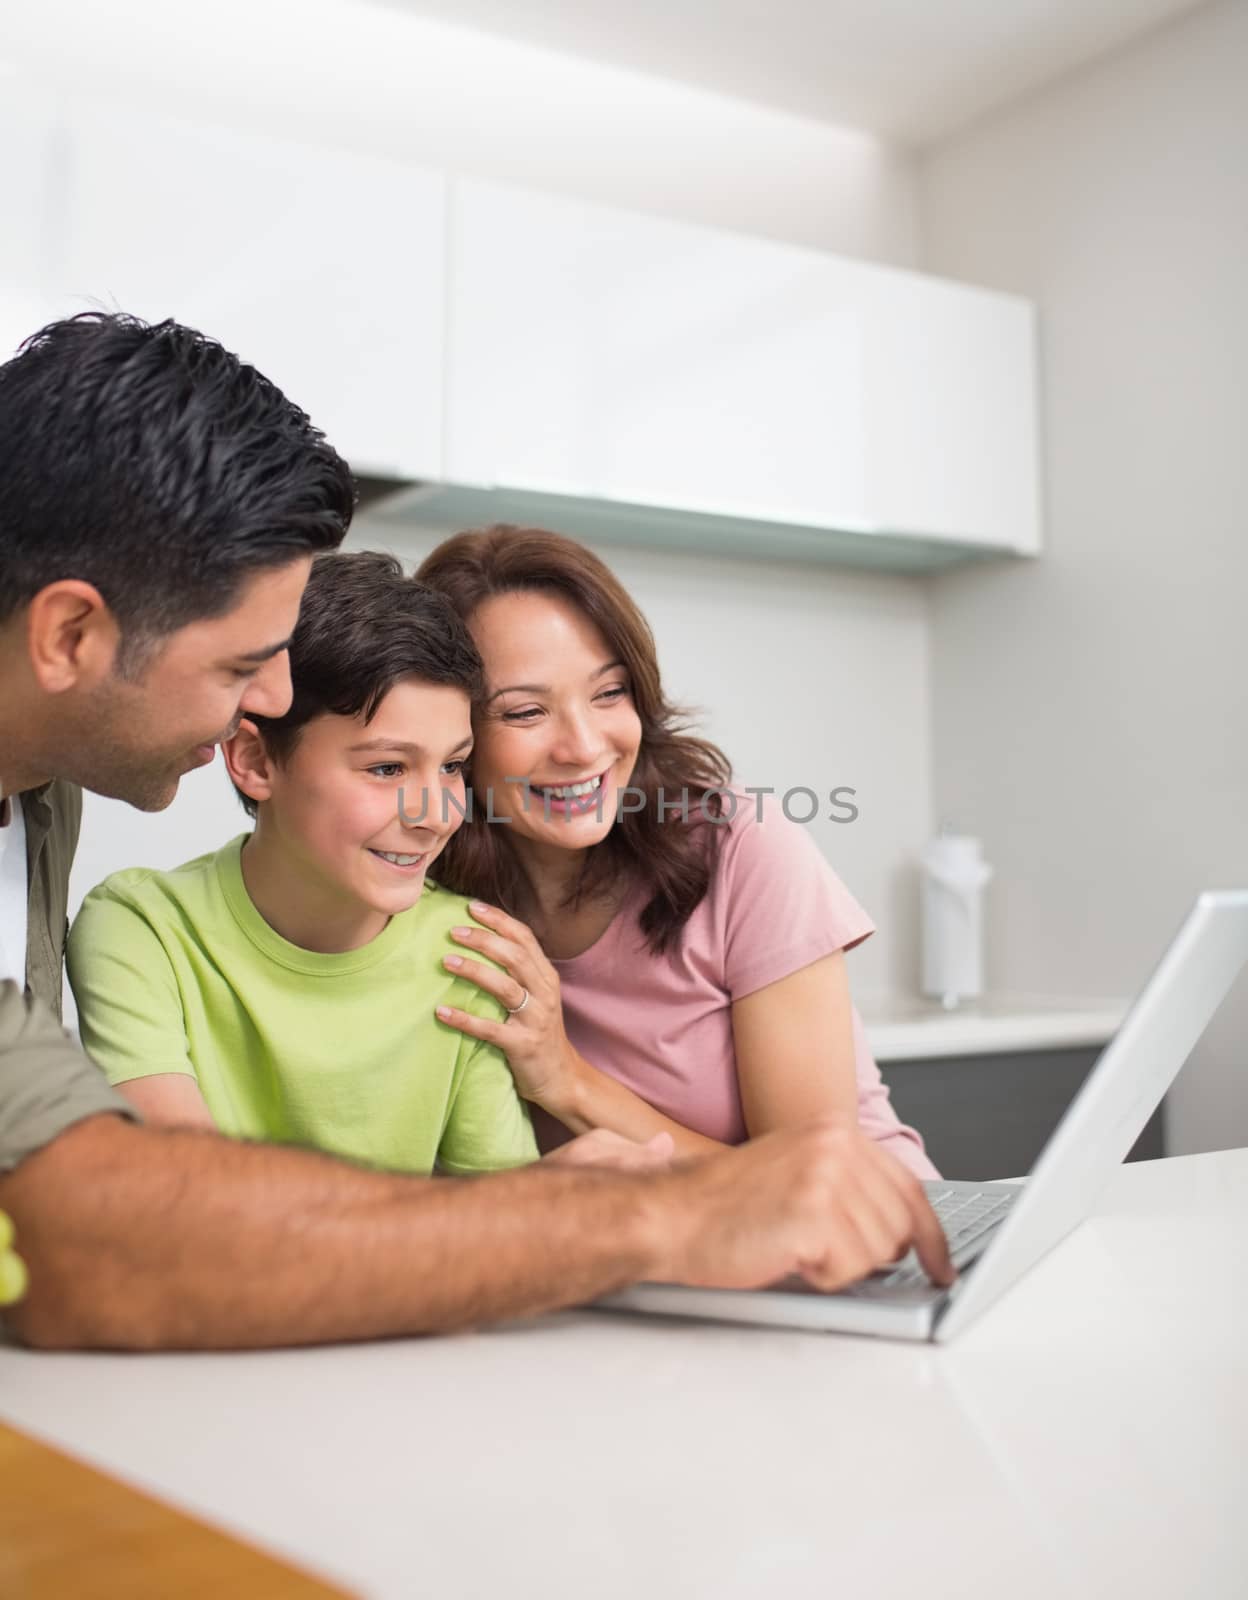 Smiling couple with son using laptop by Wavebreakmedia